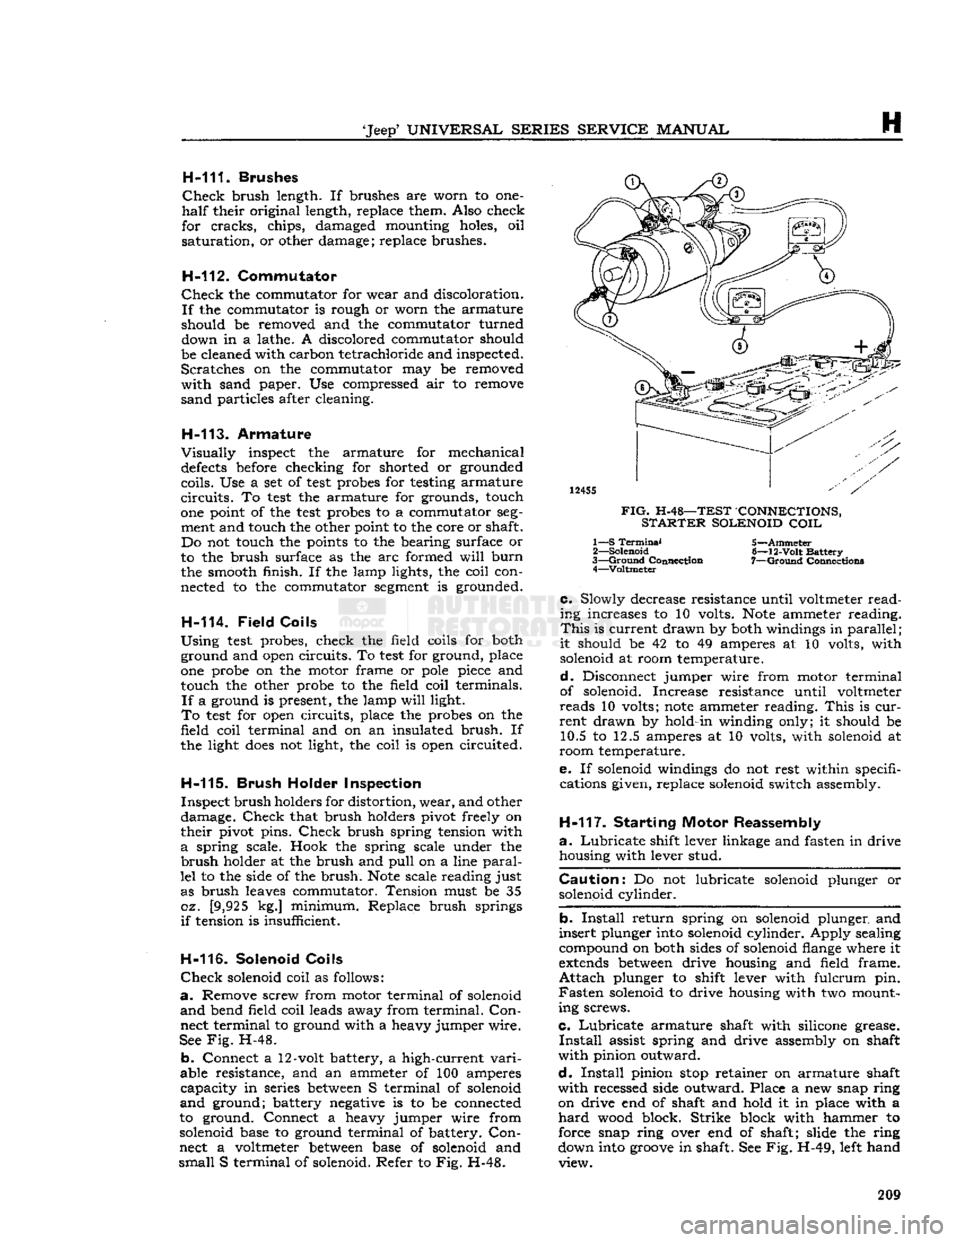 JEEP CJ 1953  Service Manual 
Jeep
 UNIVERSAL
 SERIES SERVICE
 MANUAL 

H 
H-111.
 Brushes 

Check
 brush length. If brushes are worn to one-

half
 their original length, replace them. Also check 
for
 cracks,
 chips, damaged 